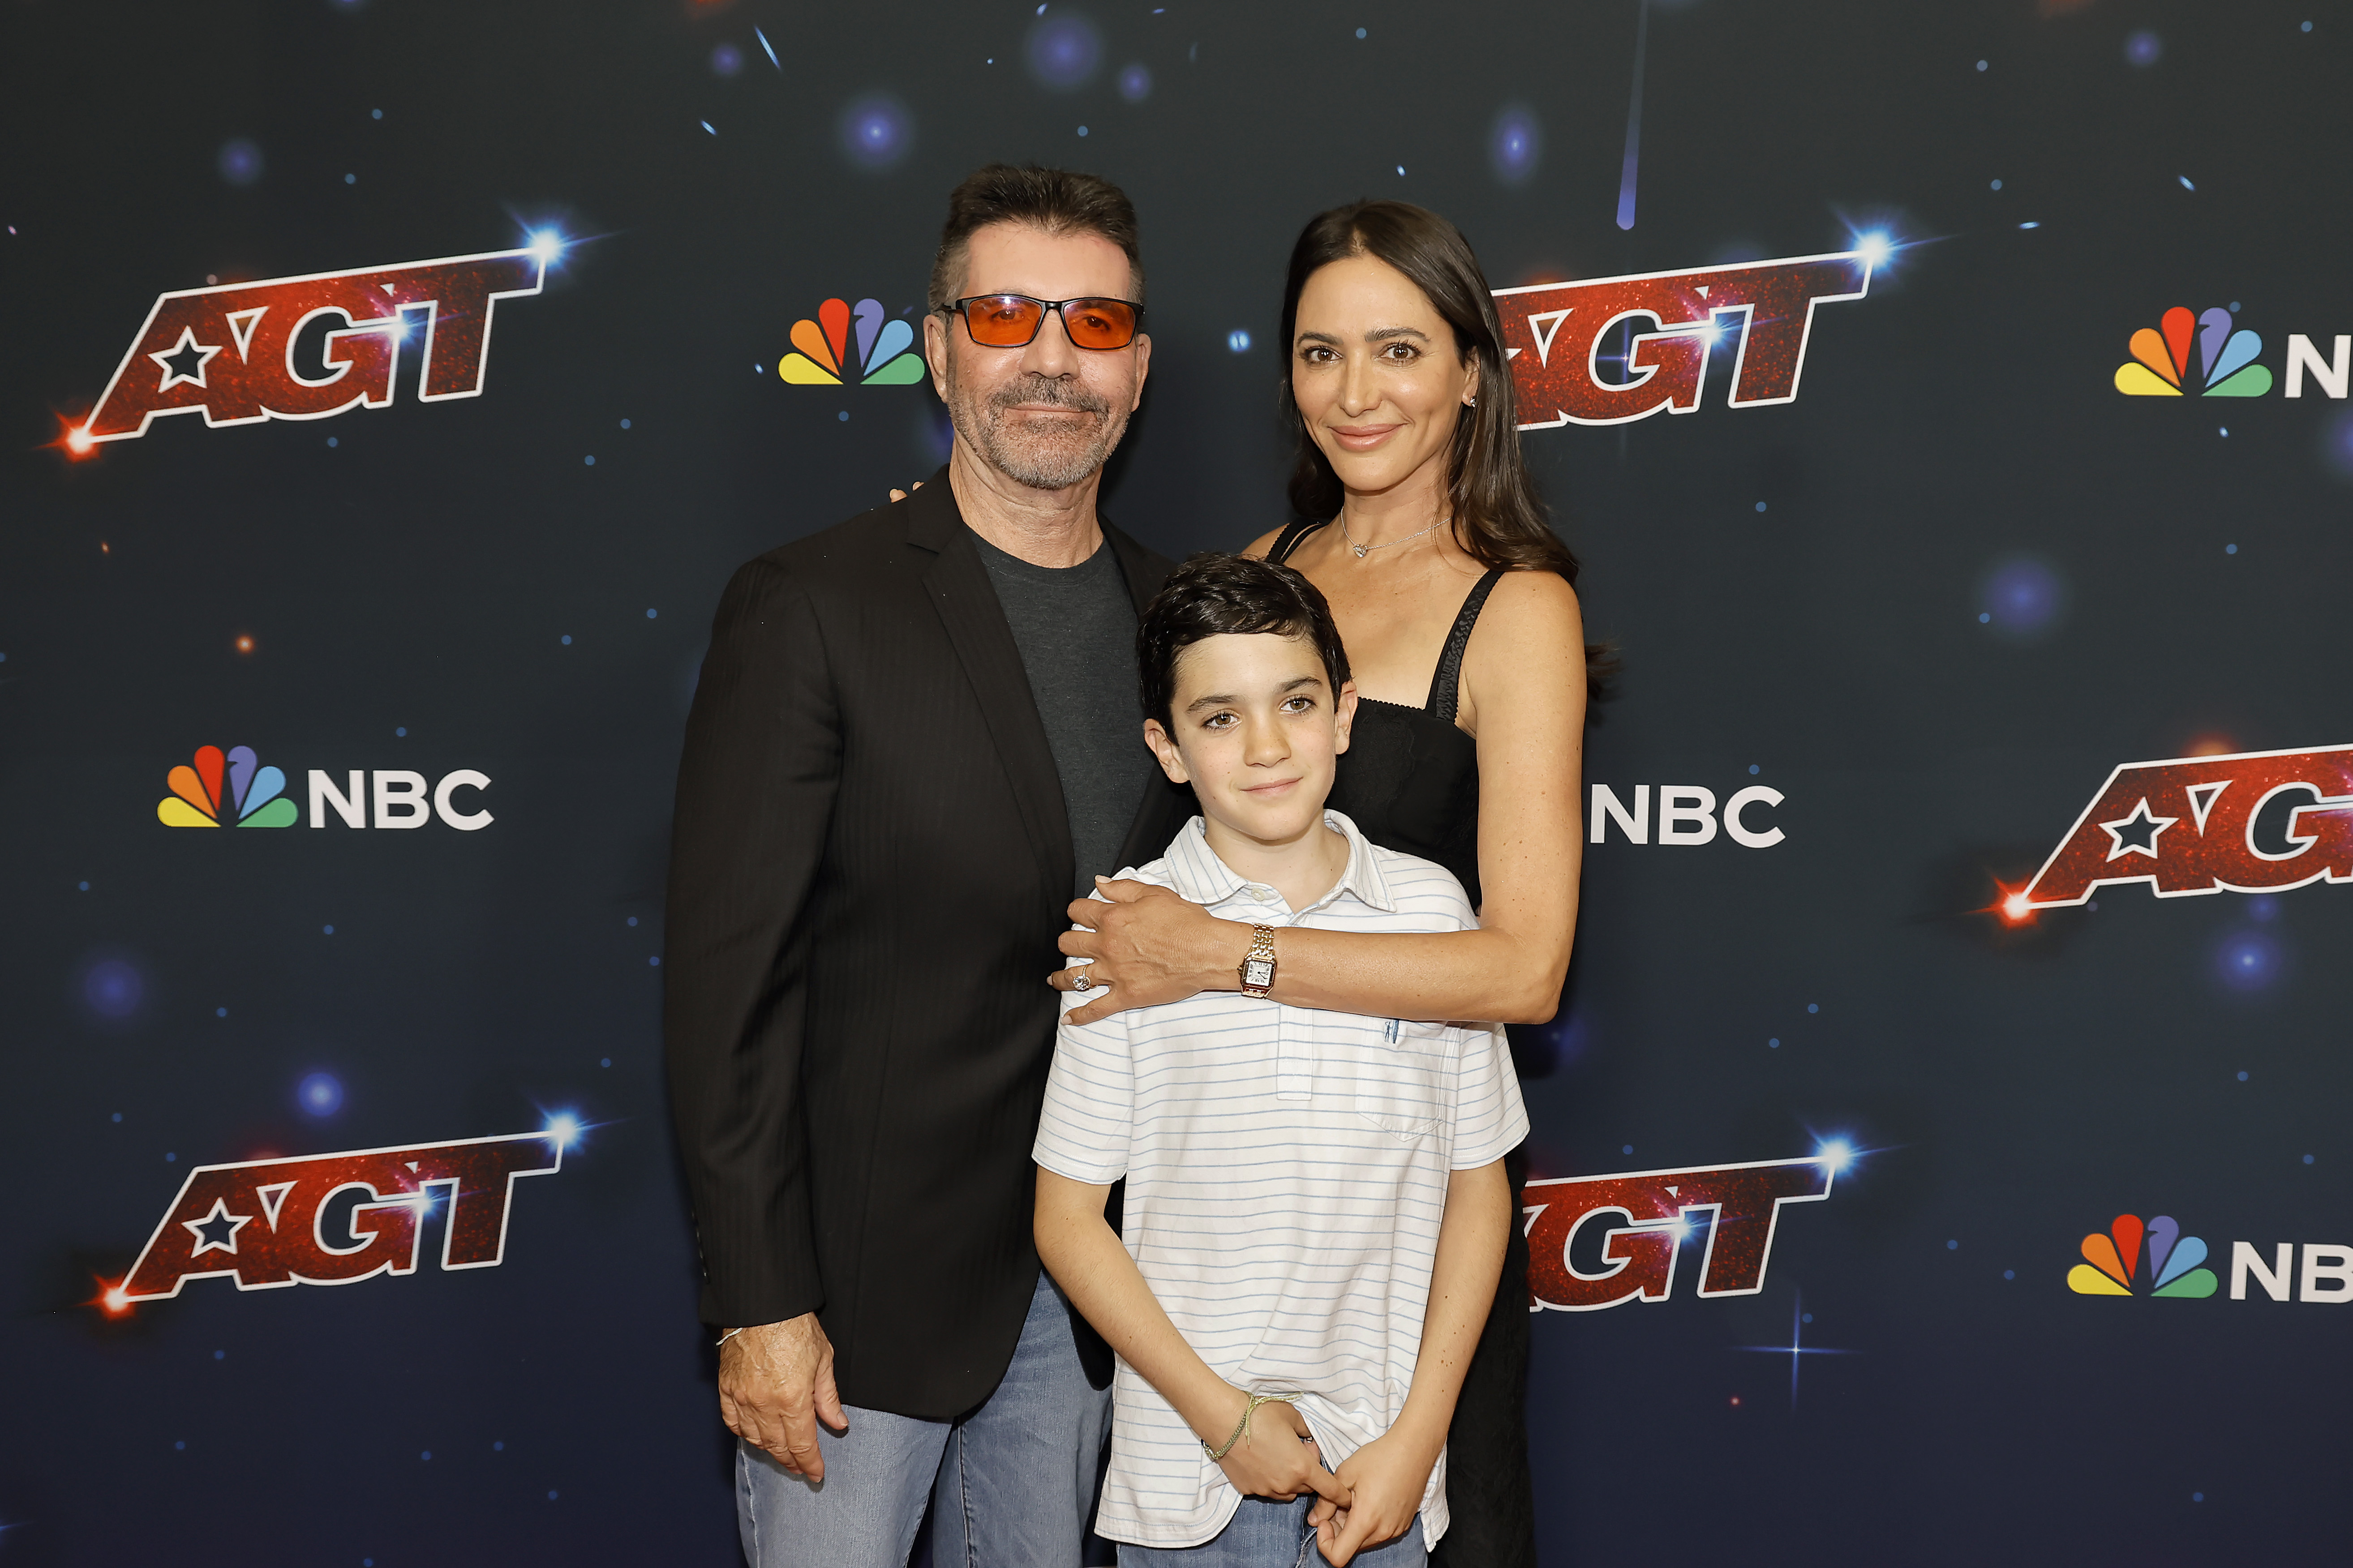 Simon Cowell, Eric Philip Cowell, and Lauren Silverman on the red carpet for "America's Got Talent" season 18 finale on September 27, 2023, in Pasadena, California | Source: Getty Images